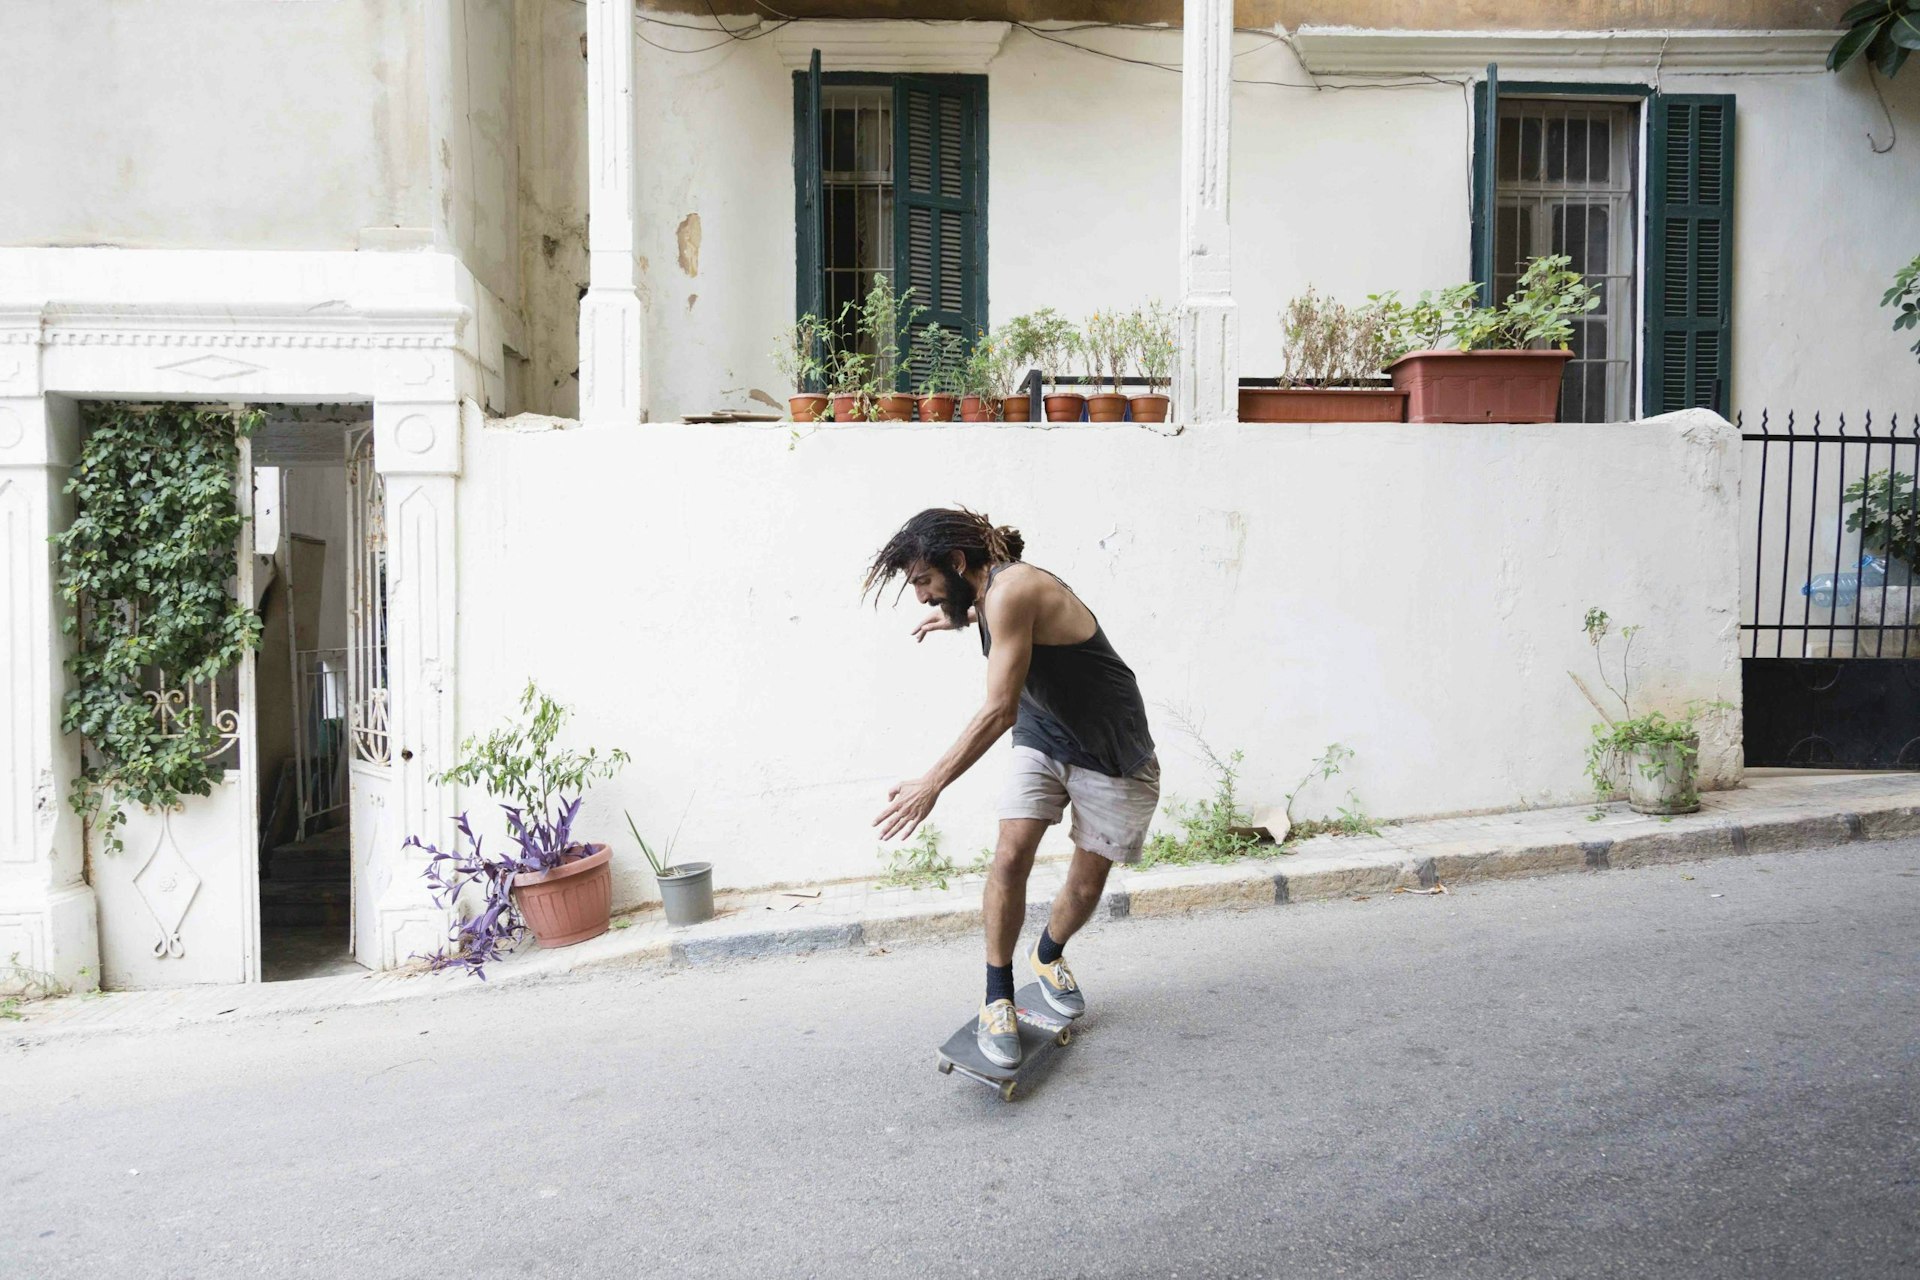 Beirut’s skate scene is rebuilding from the rubble